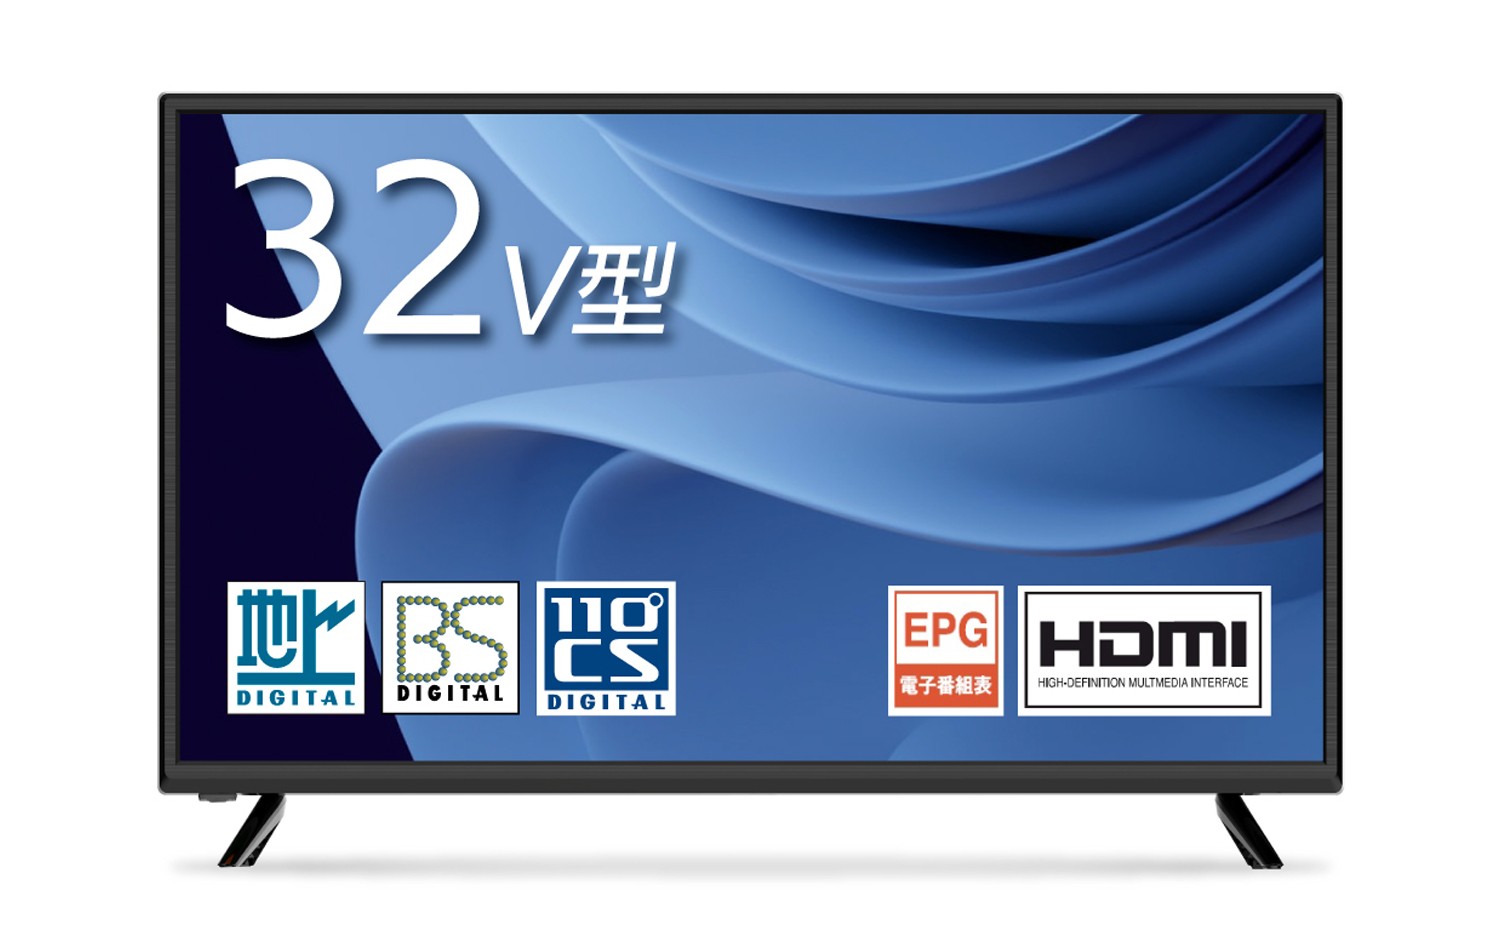 AS-21D2001TV - TV - 株式会社WIS (ウィズ)